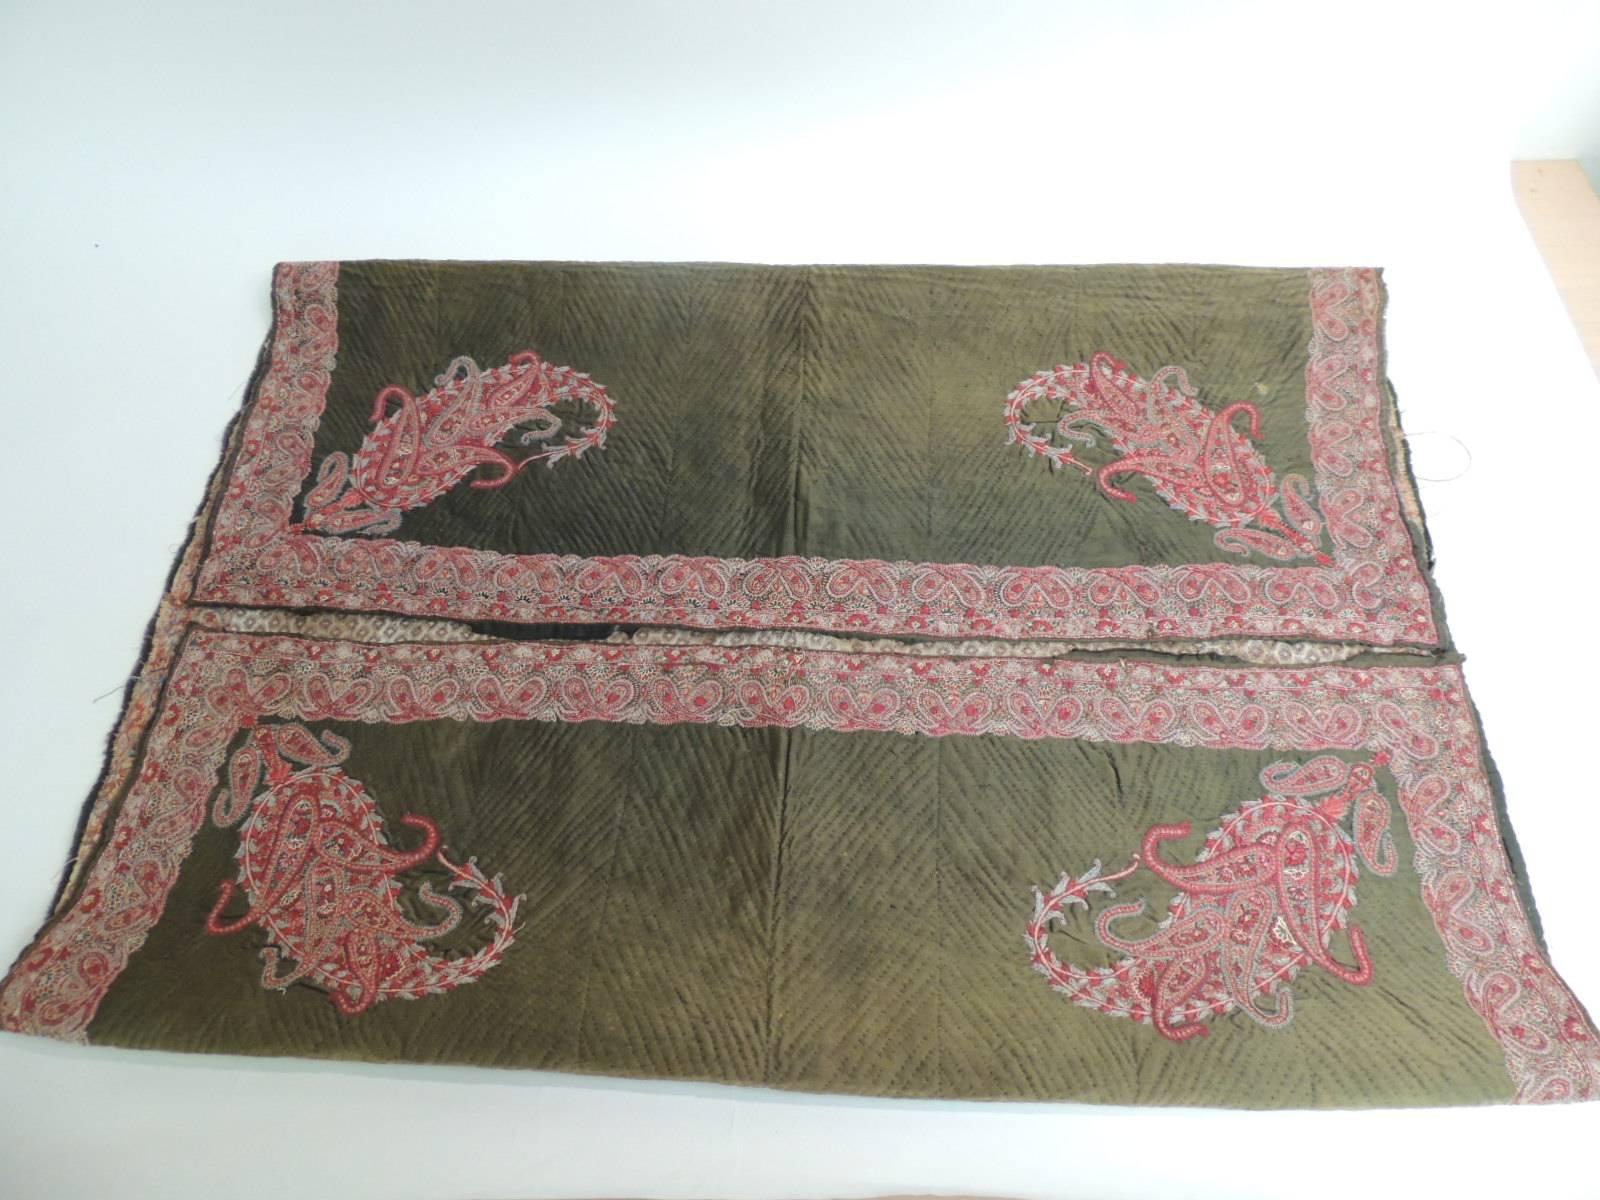 Anglo Raj 18th Century Red and Green Indian Paisley Embroidery Cloth